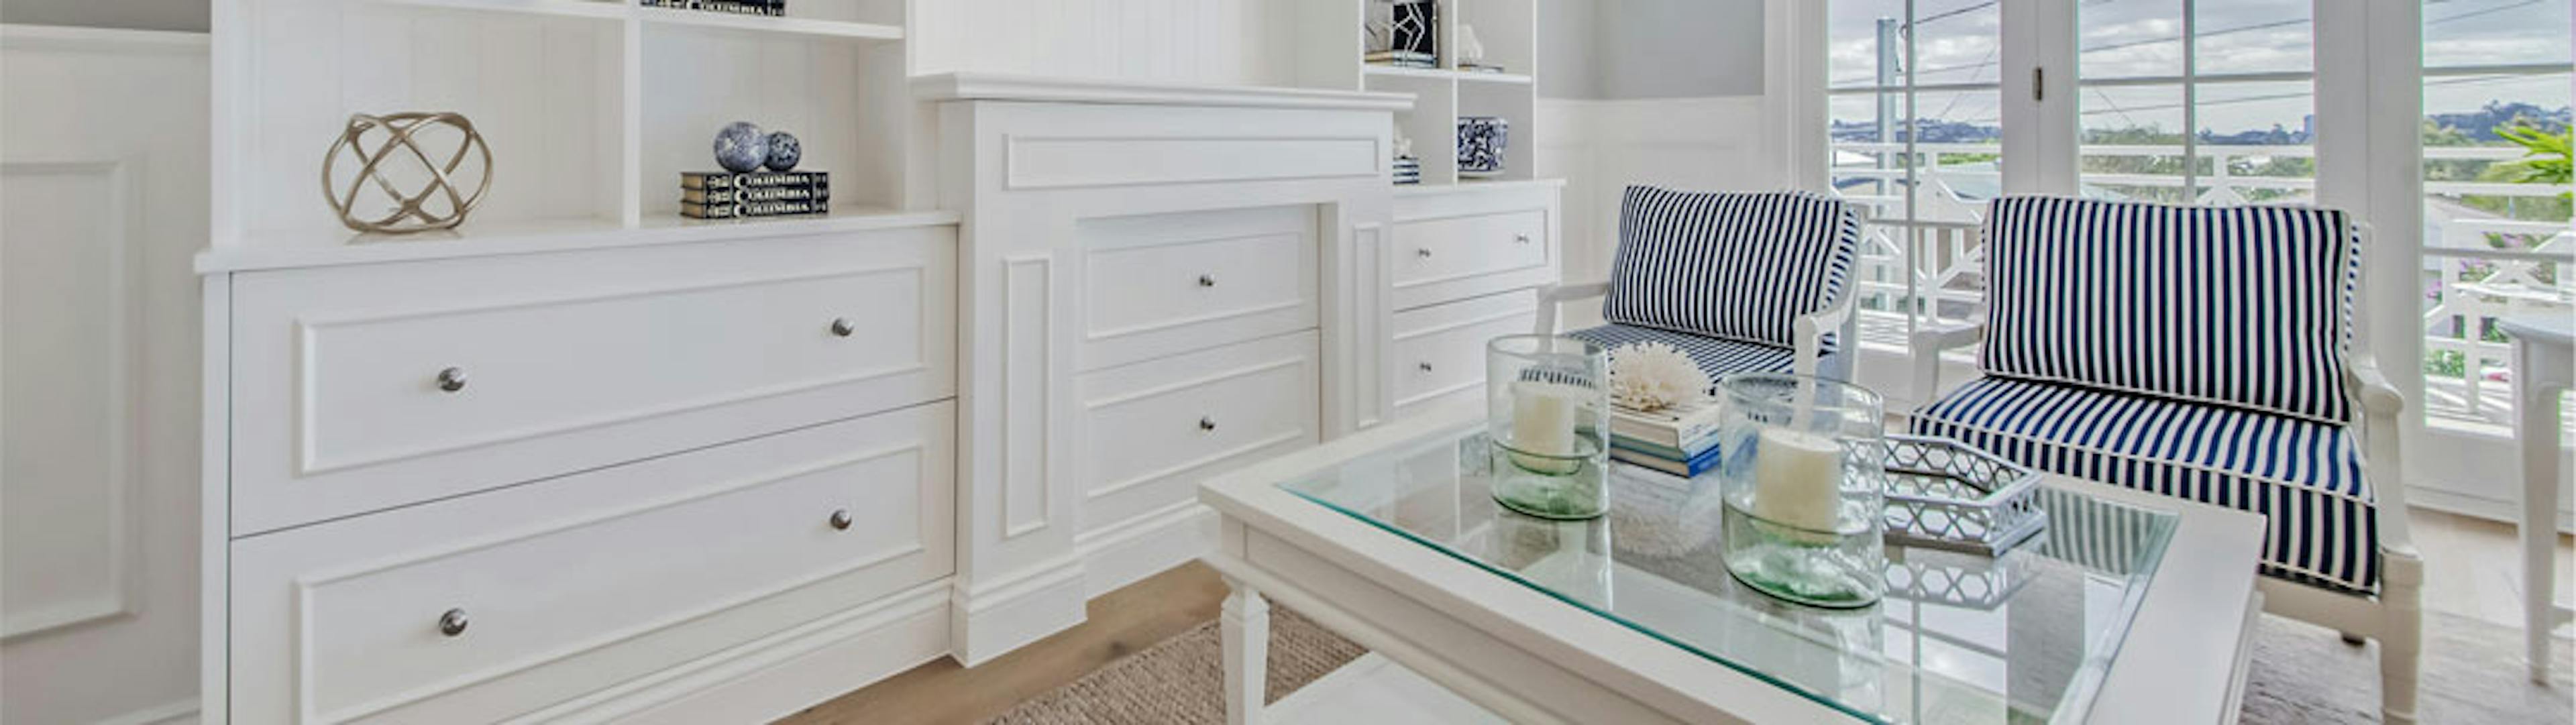 White Hampton style book case that goes from floor to ceiling with storage drawers below open 2pac shelving. Two upholstery chairs near a glass coffee table with blue and white stripe cushions 